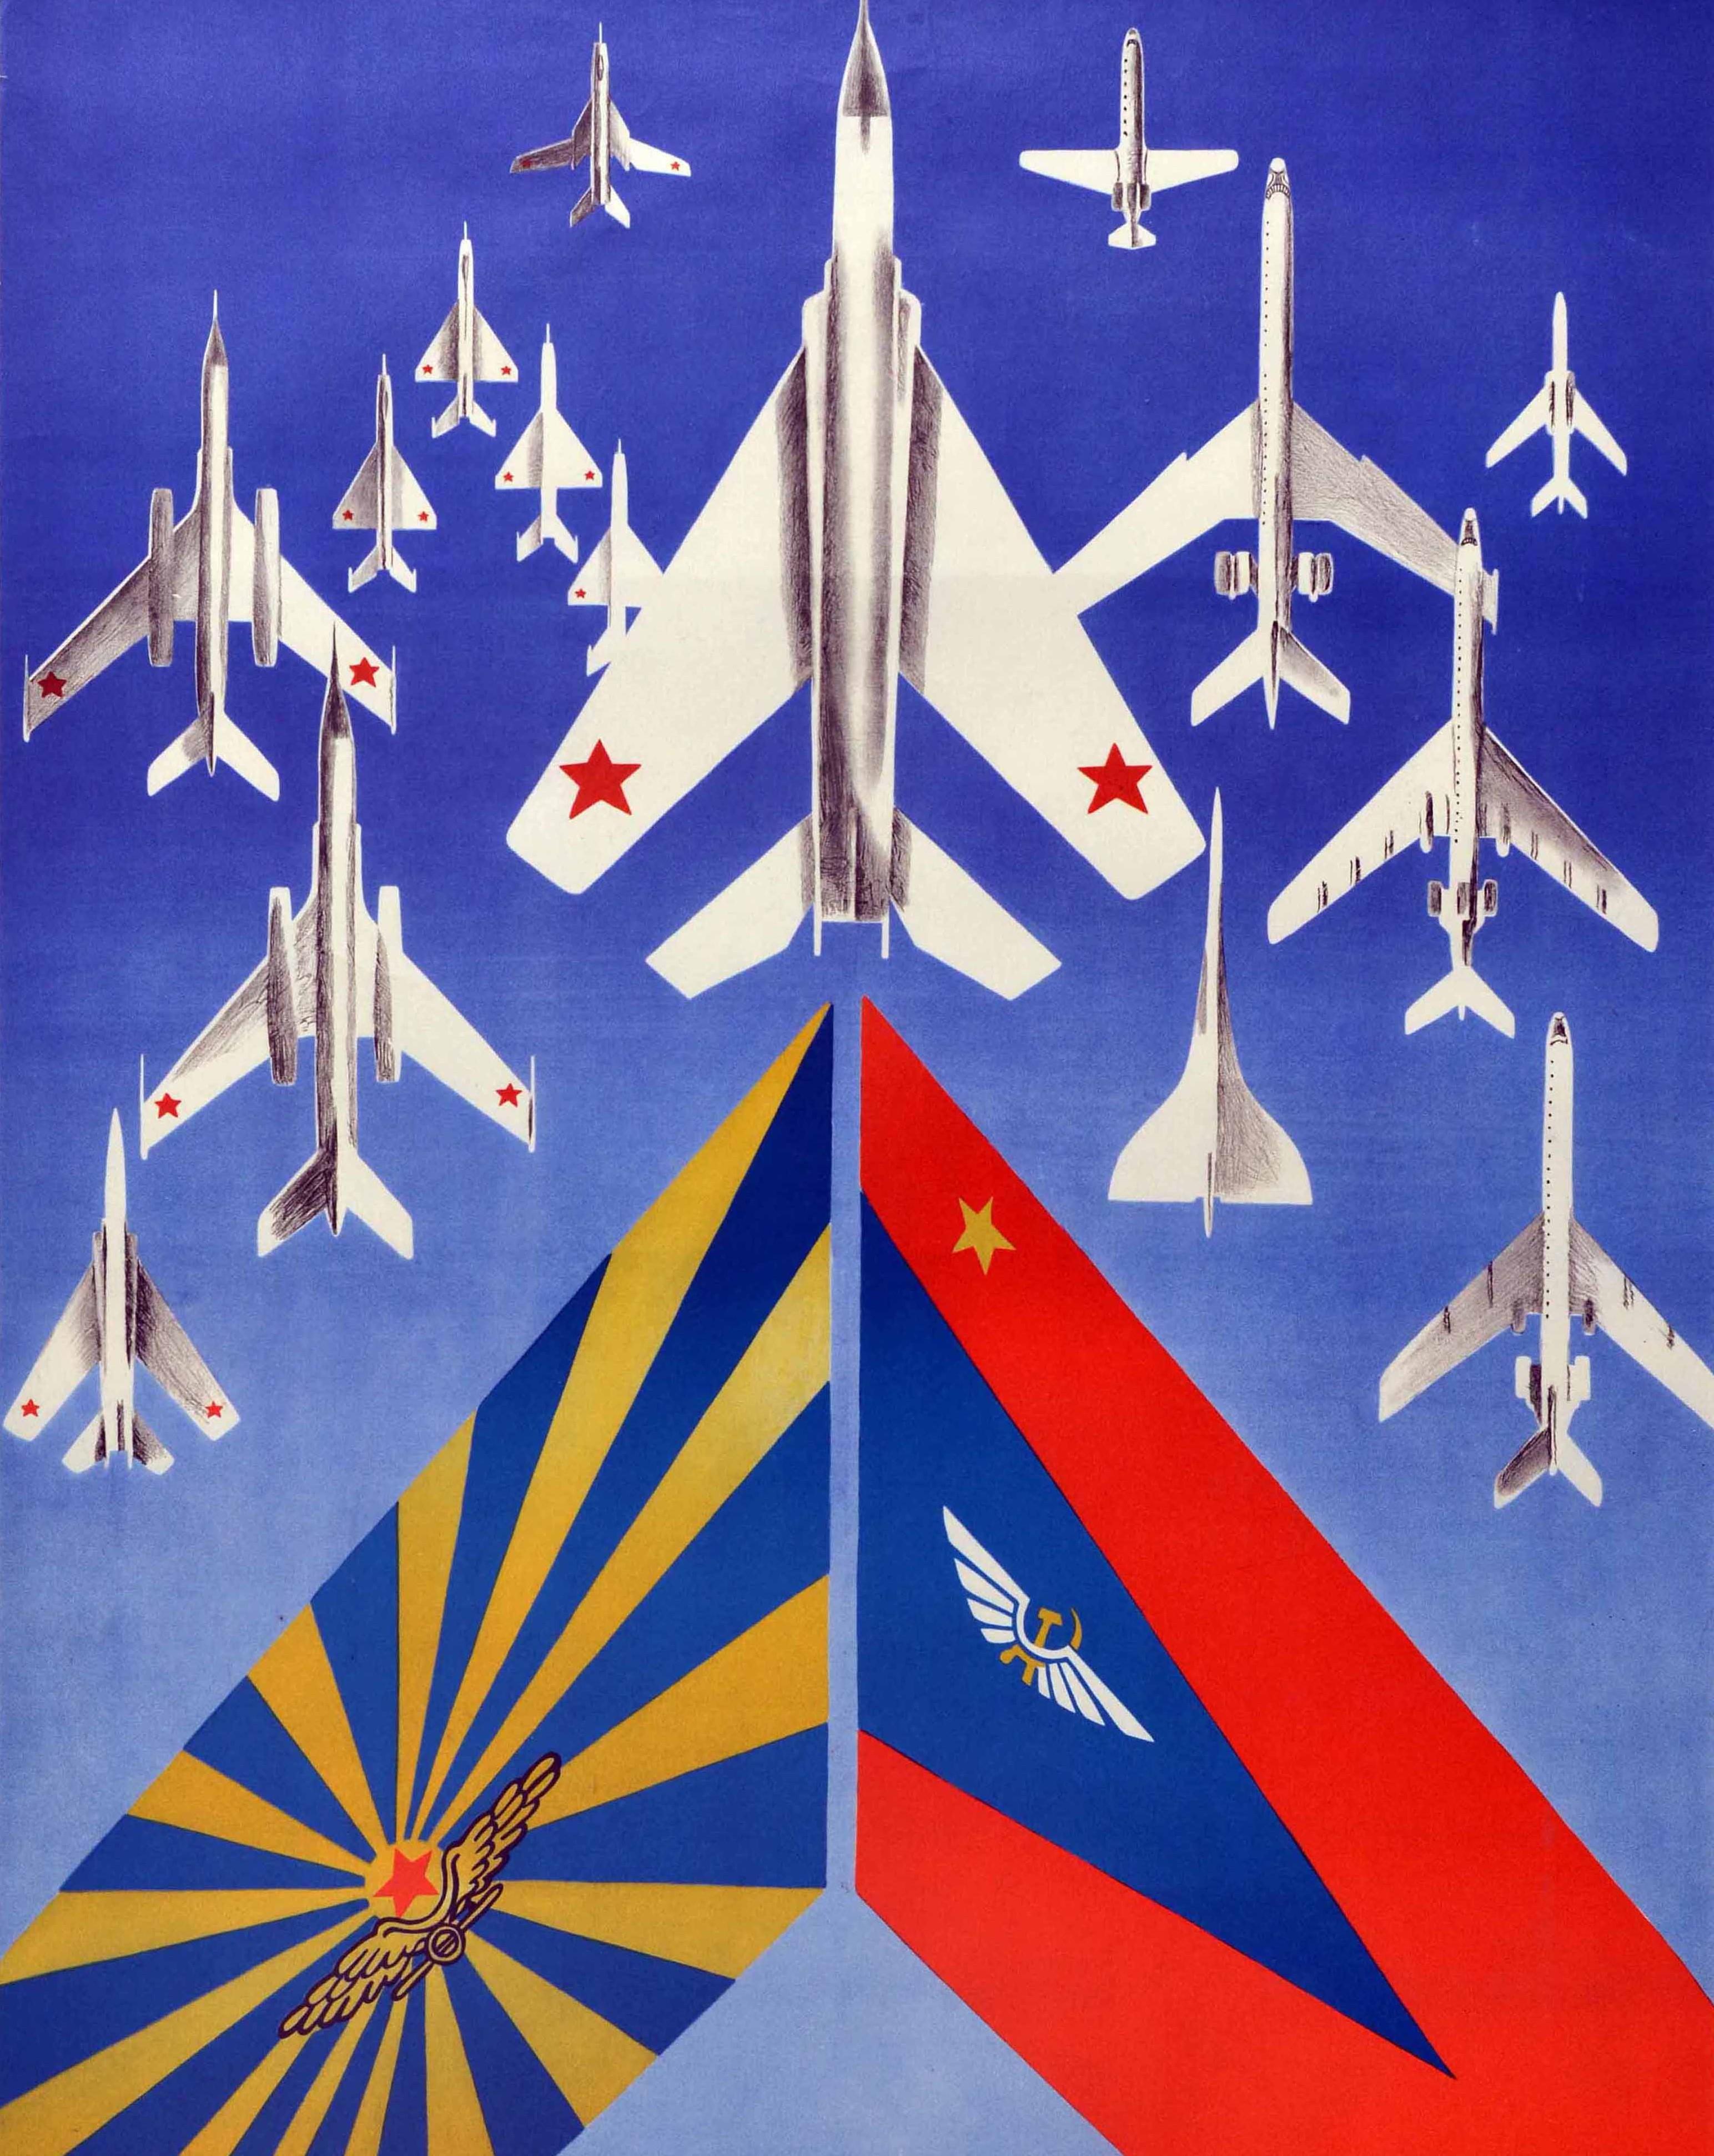 Russian Original Vintage Poster Soviet Air Force Wings Of Motherland Glory USSR Military